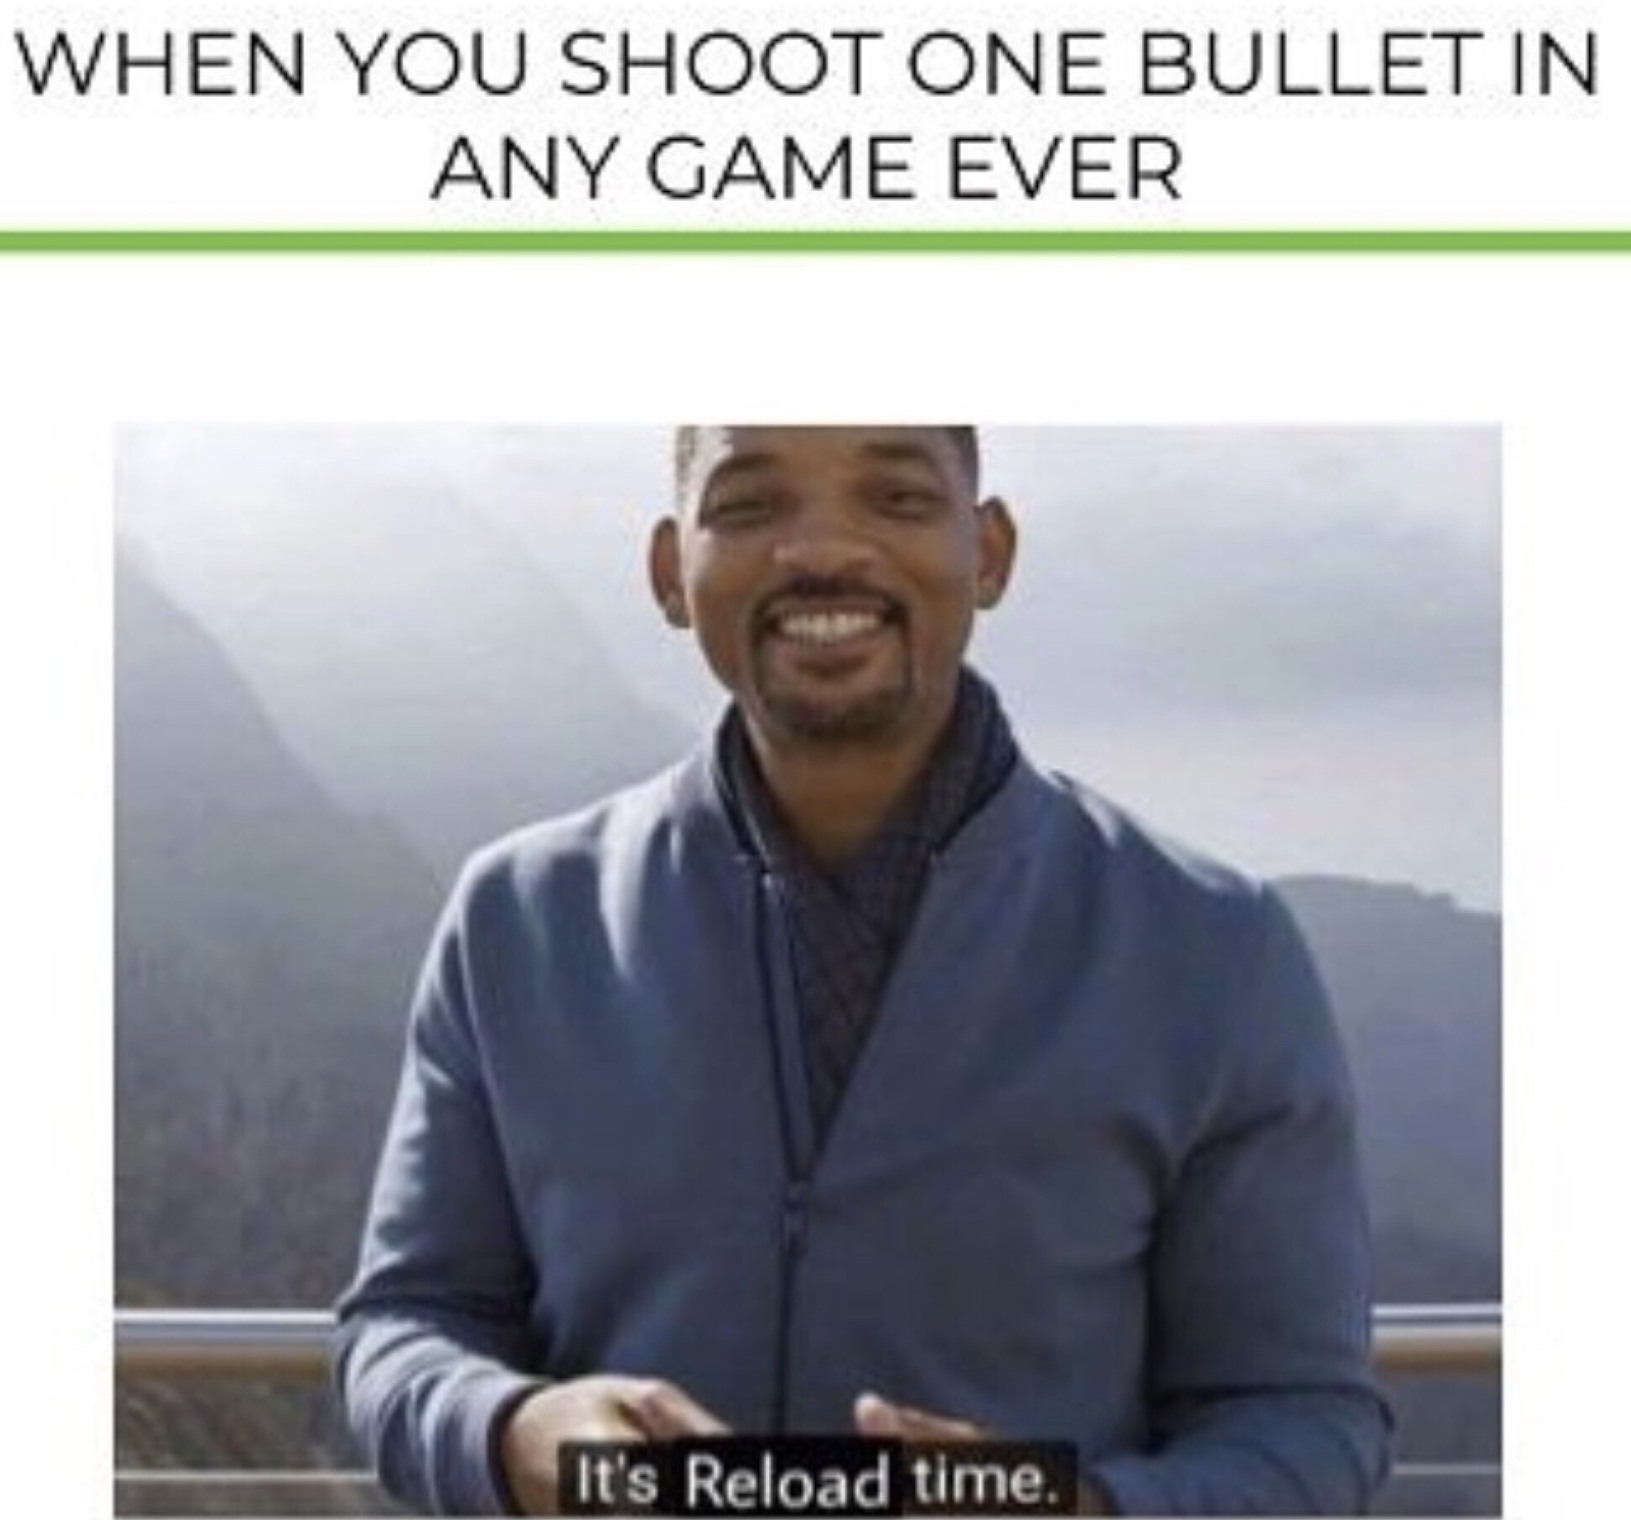 time to reload - meme